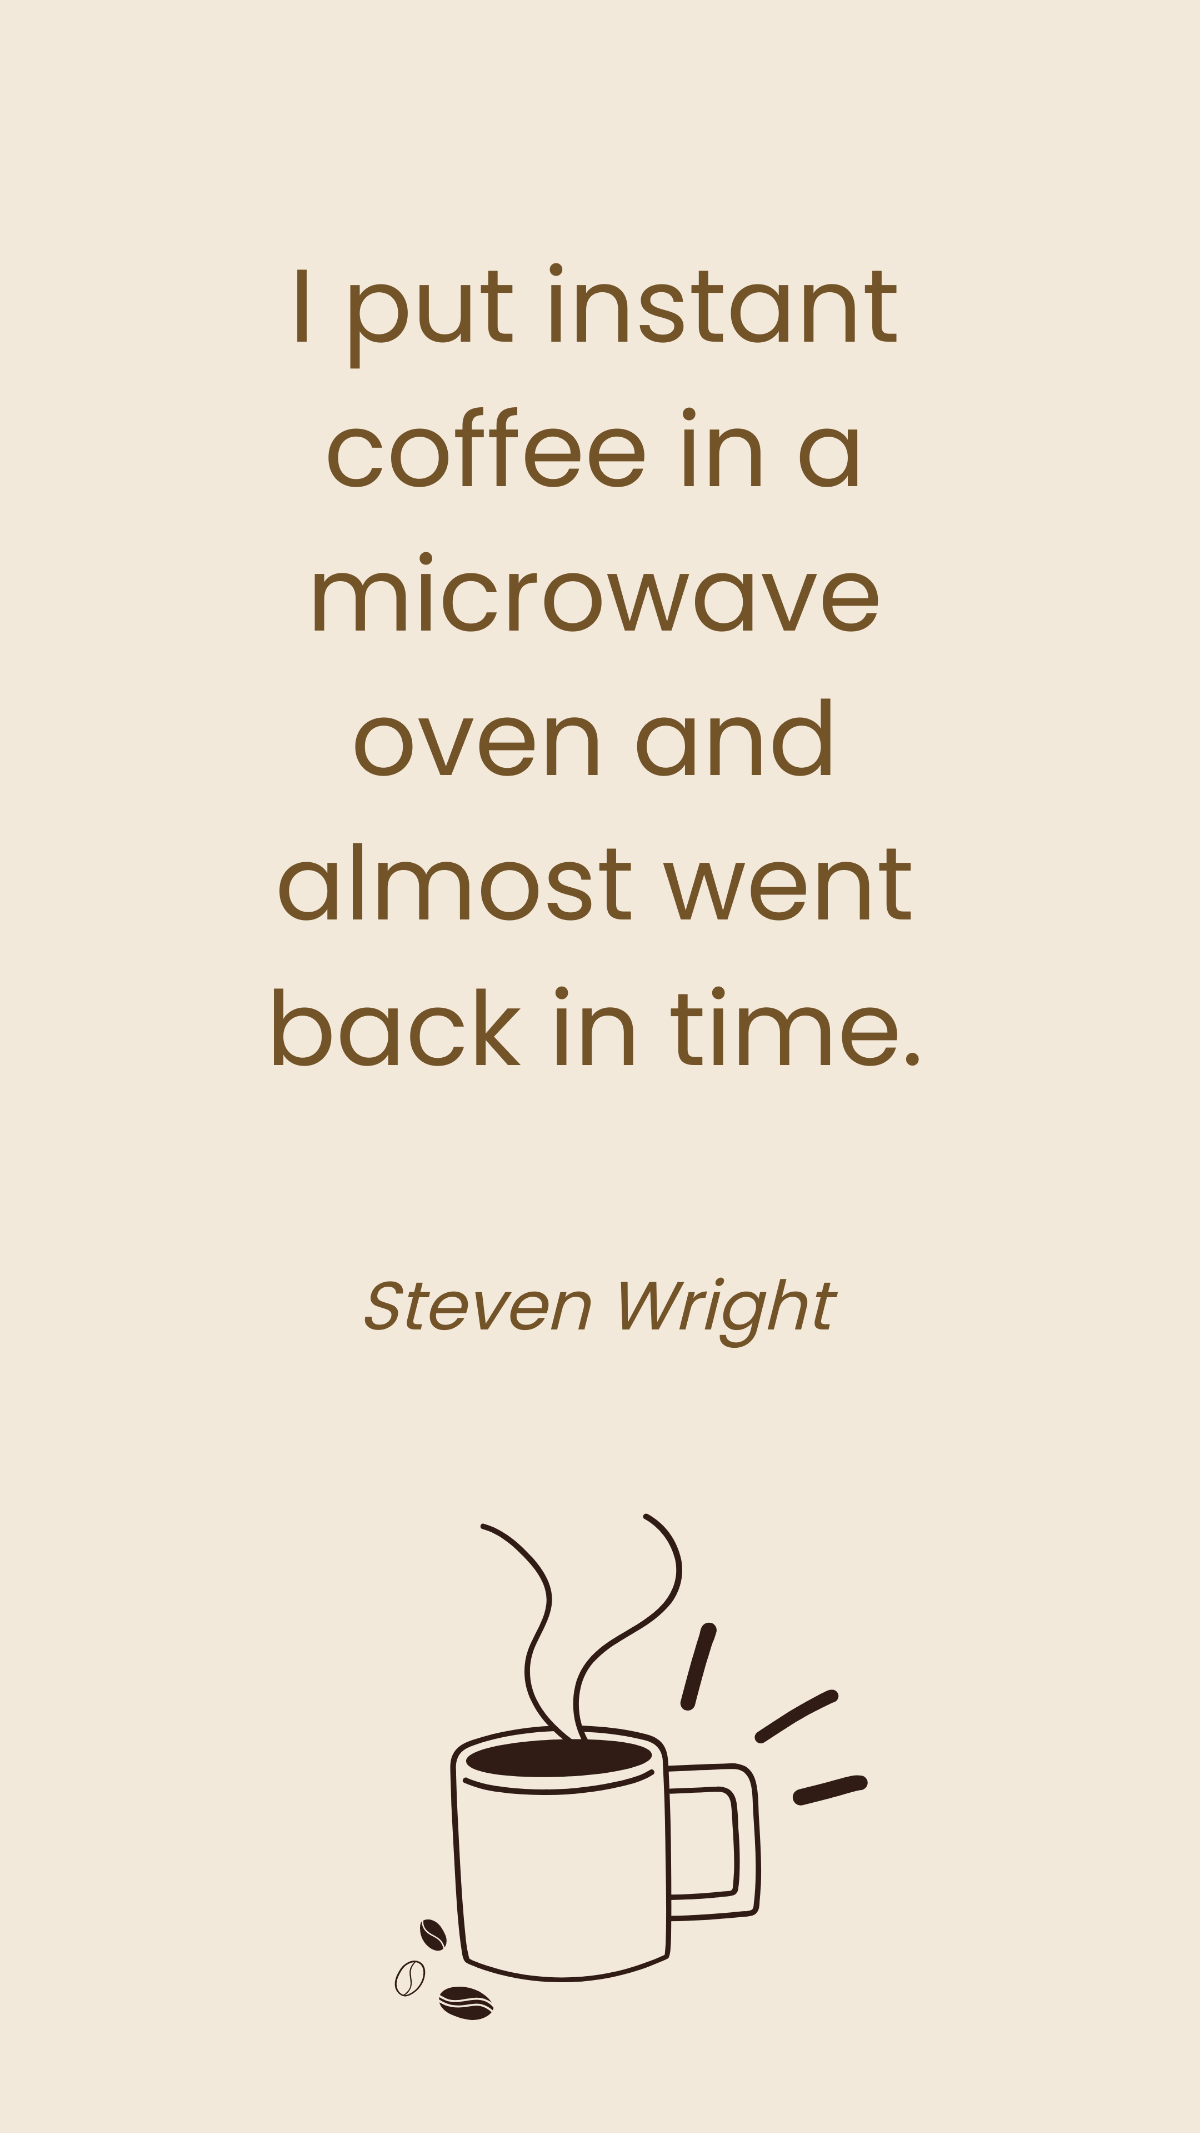 Steven Wright - I put instant coffee in a microwave oven and almost went back in time. Template